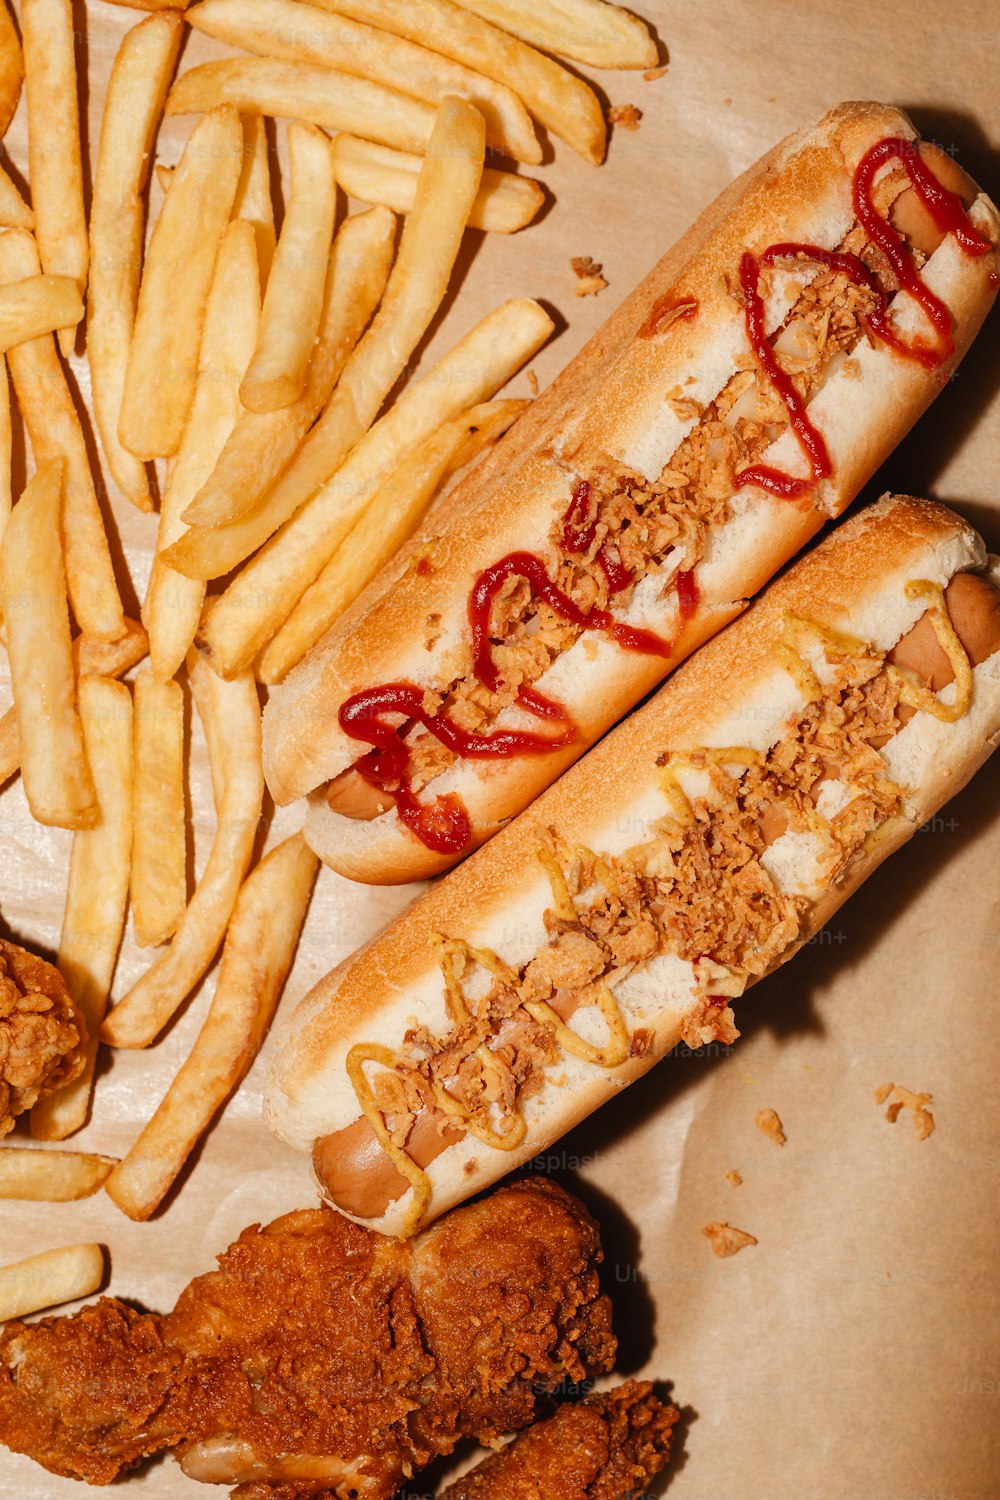 a close up of a hot dog and french fries